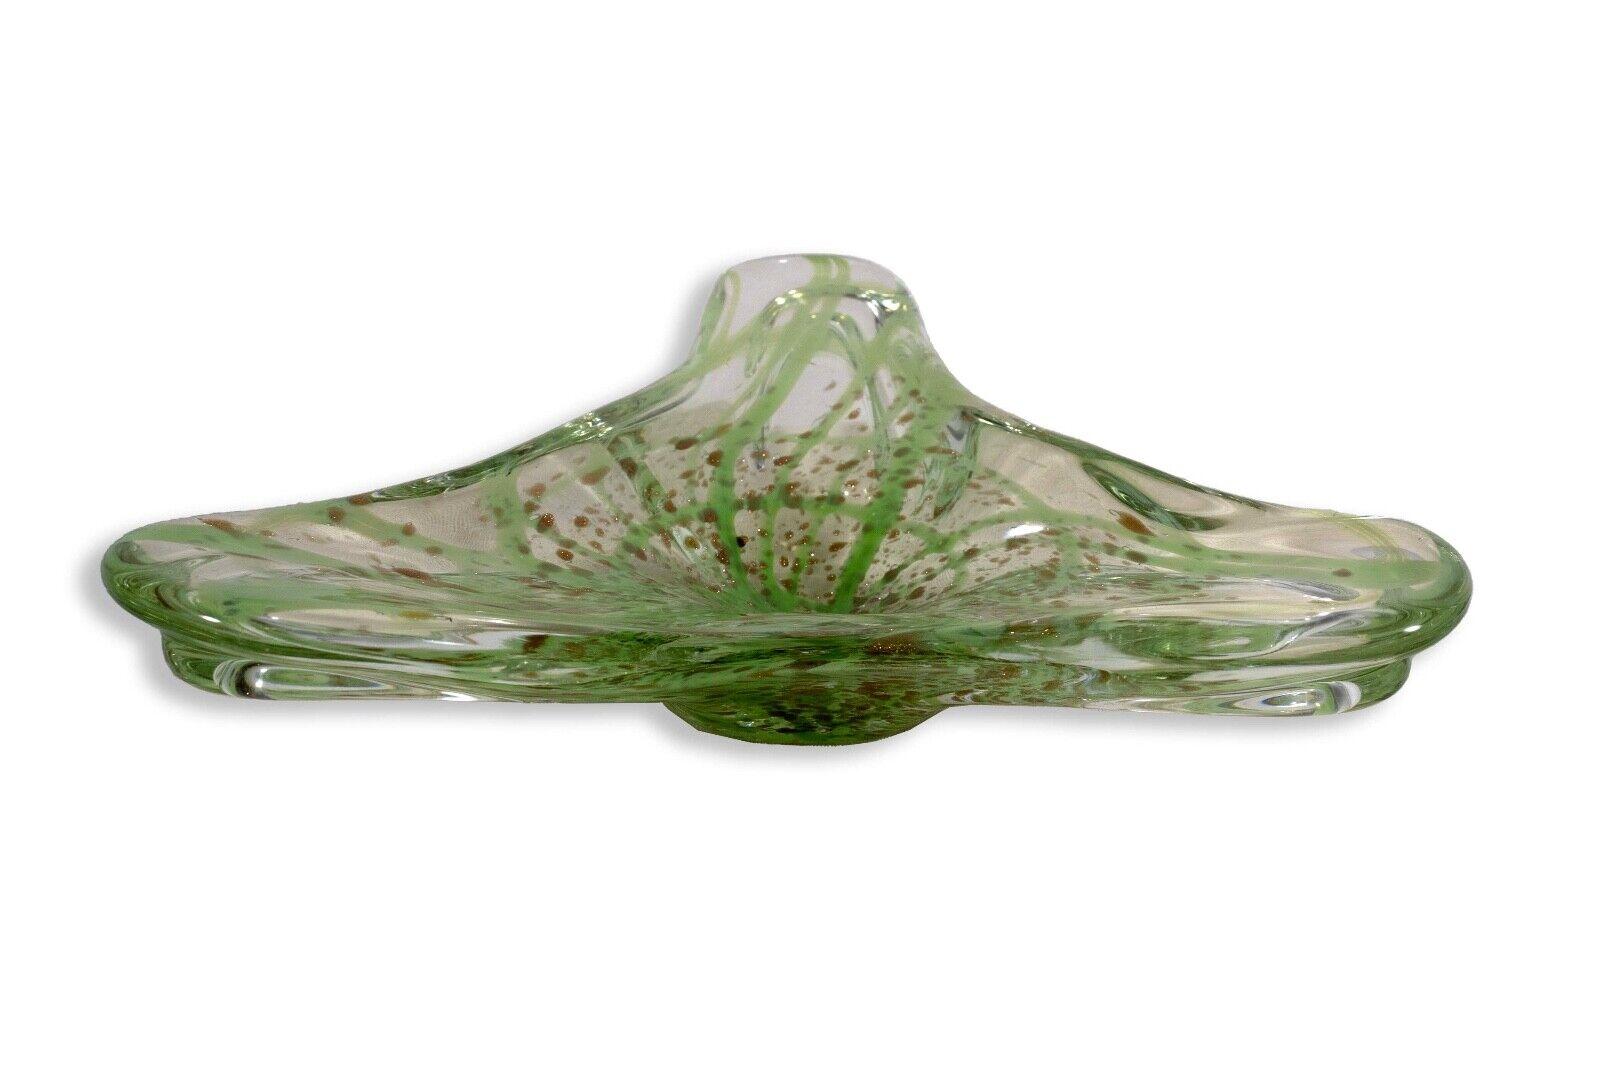 A stunning vintage Murano art glass bowl. Freeform shape in clear and green glass with a gold speckled design. An earth-toned accent perfect for a modern designed space. From a private collection. Dimensions: 2.5”h x 11”w x 9”d. In very good vintage